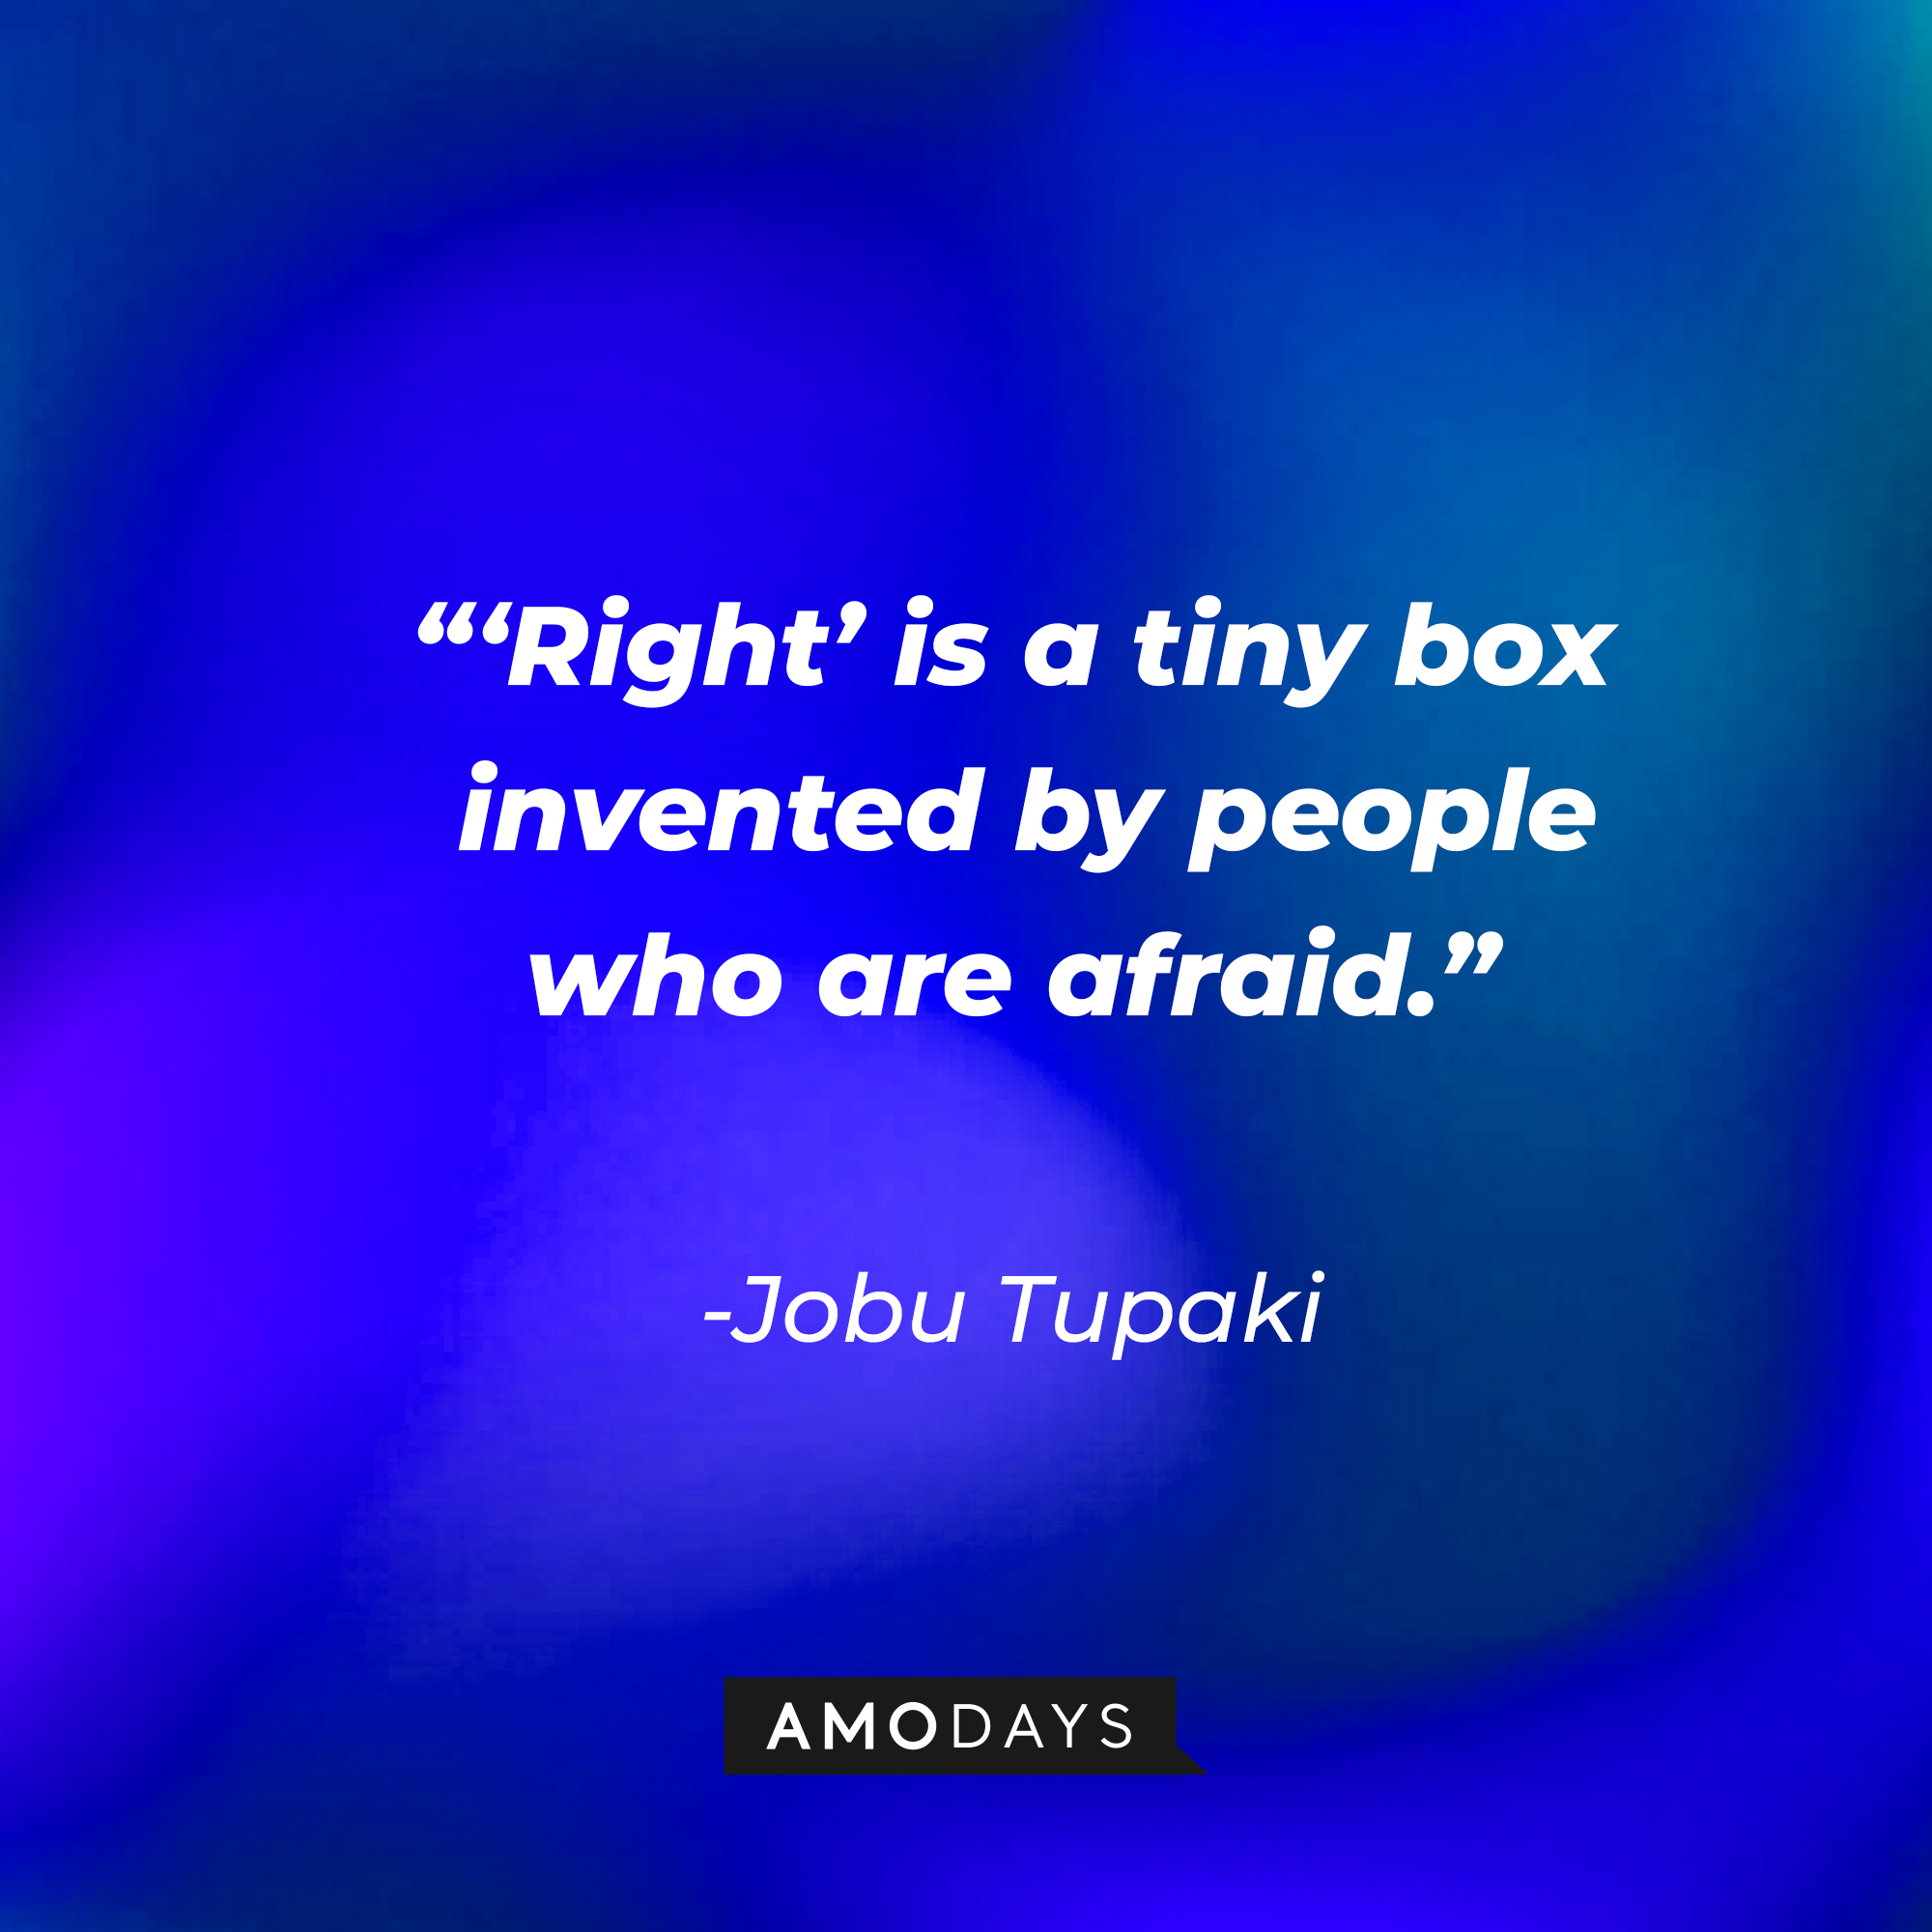 Jobu Tupaki’s quote: “‘Right’ is a tiny box invented by people who are afraid.”  | Source: AmoDays